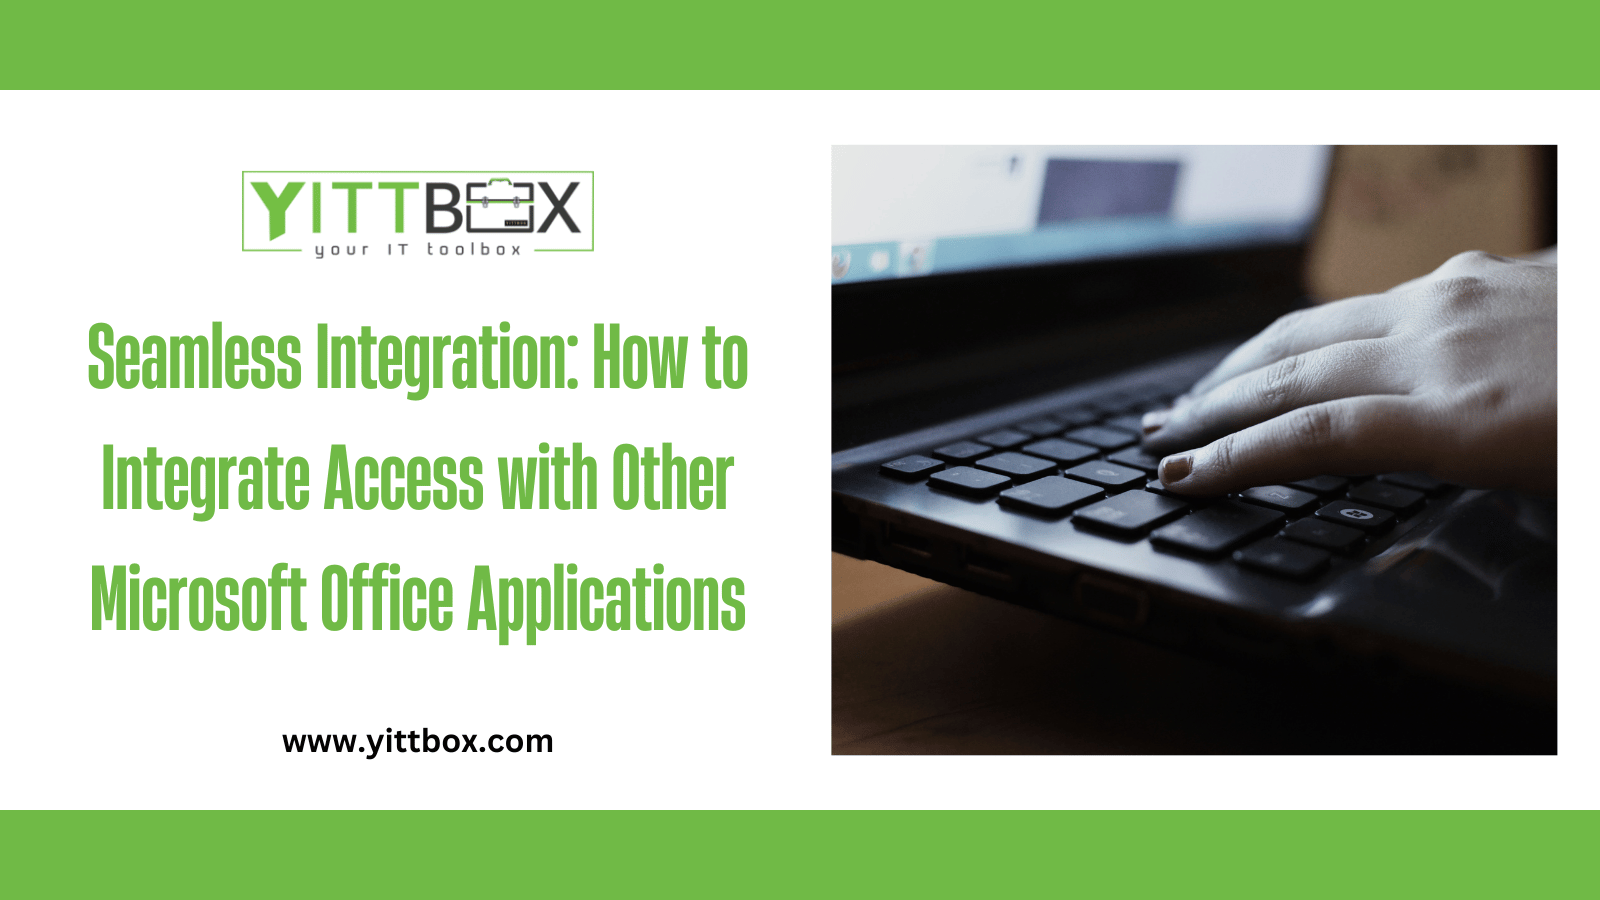 Seamless Integration: How to Integrate Access with Other Microsoft Office Applications